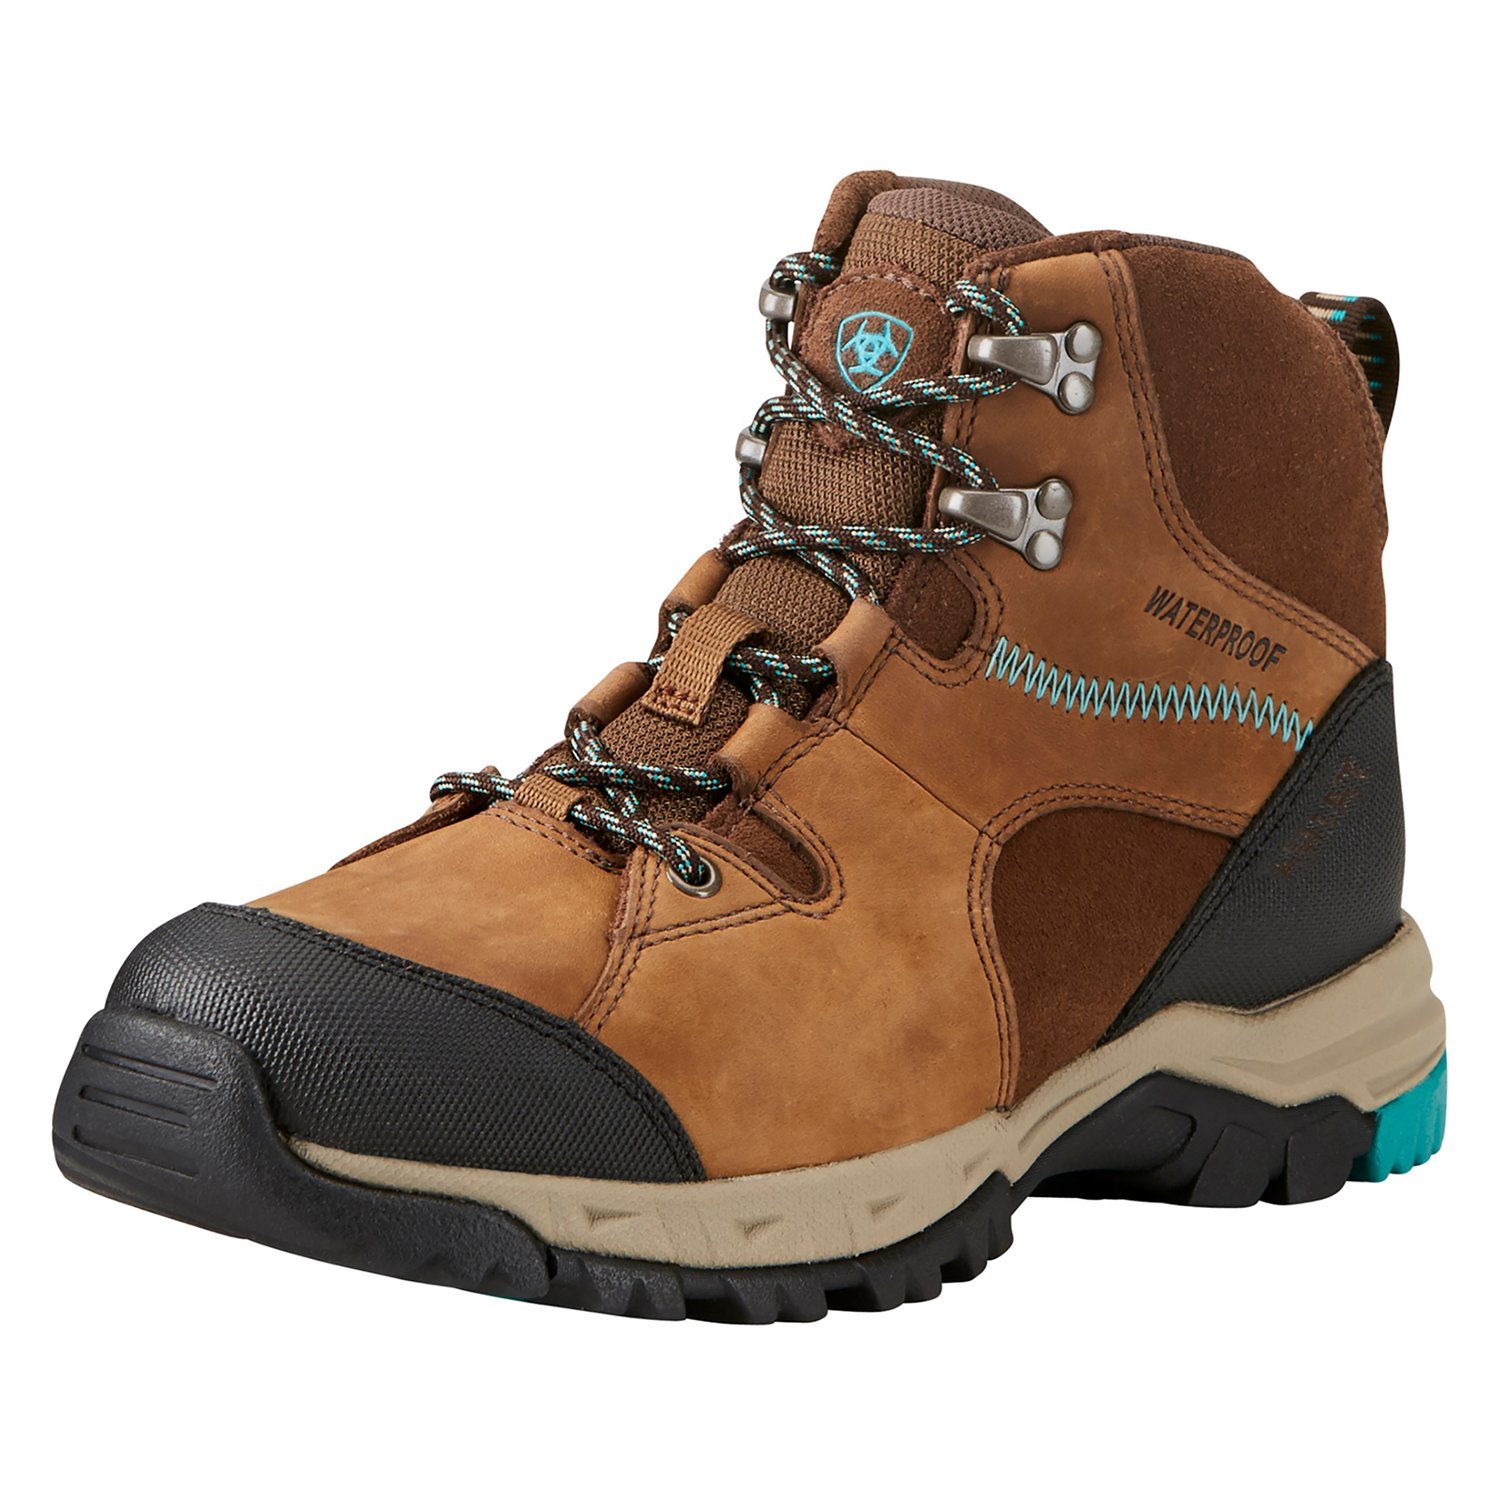 ARIAT Outdoorschuh Skyline Mid H2O distressed brown | 42